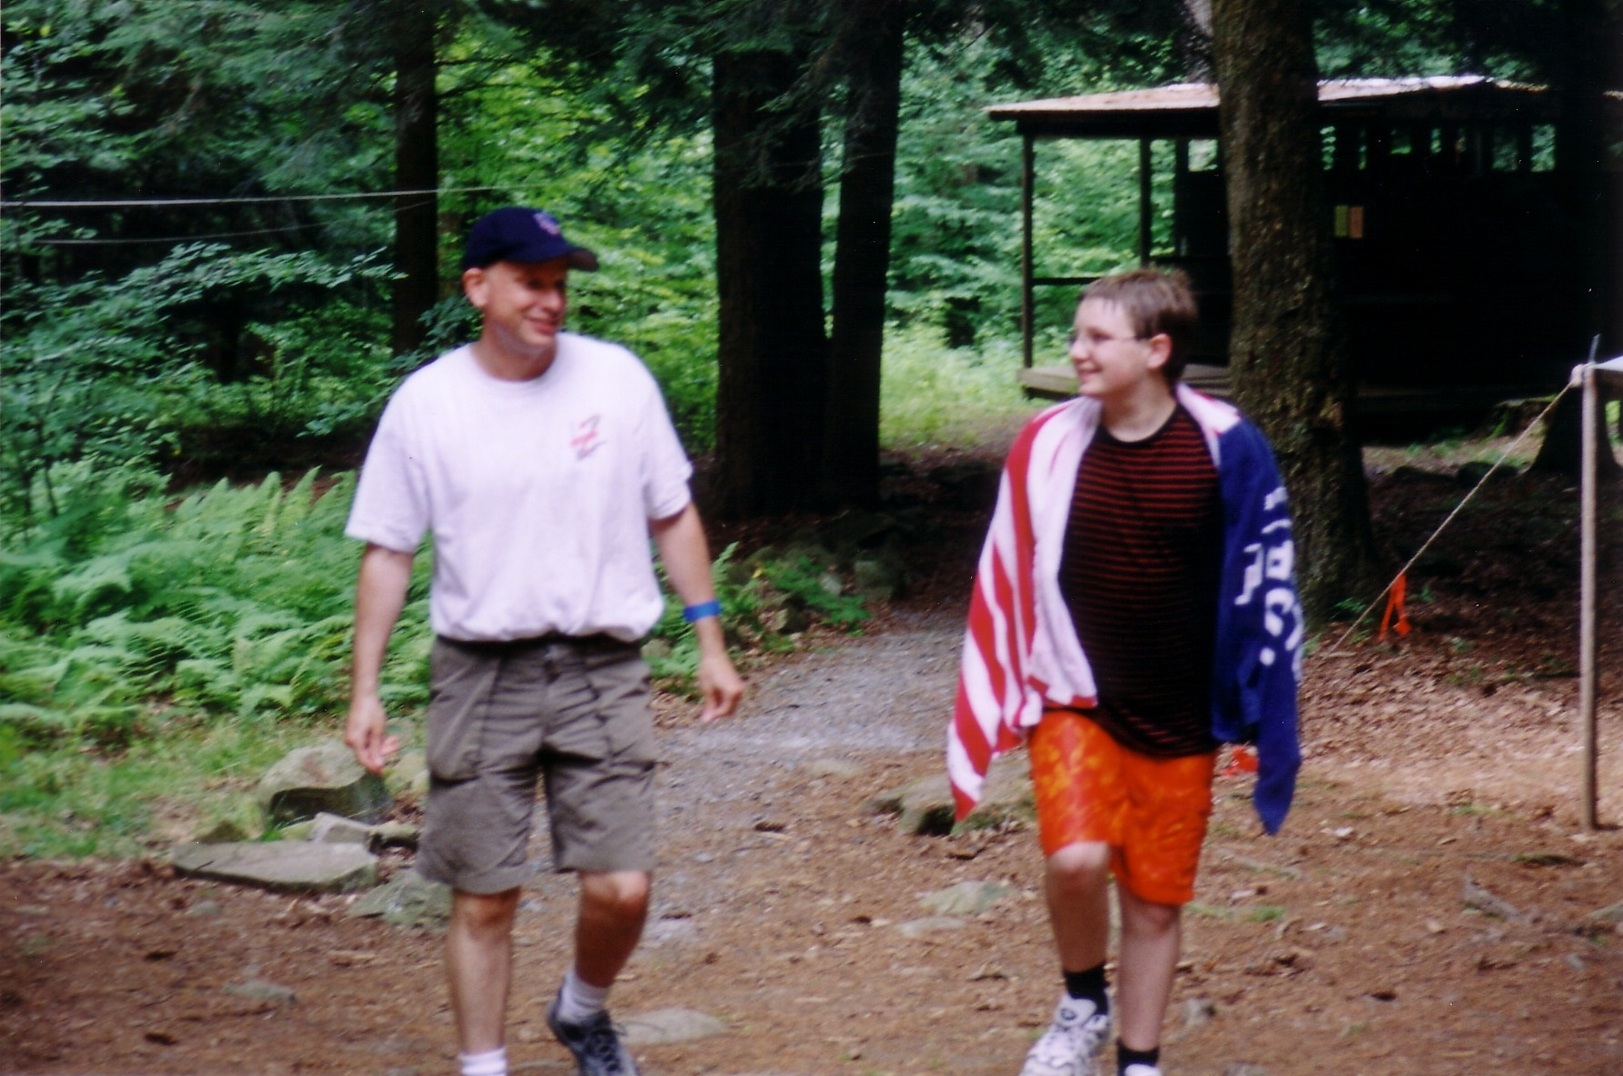 Two people walking towards the camera talking to each other. The person on the right is wet, and wrapped in a towel.